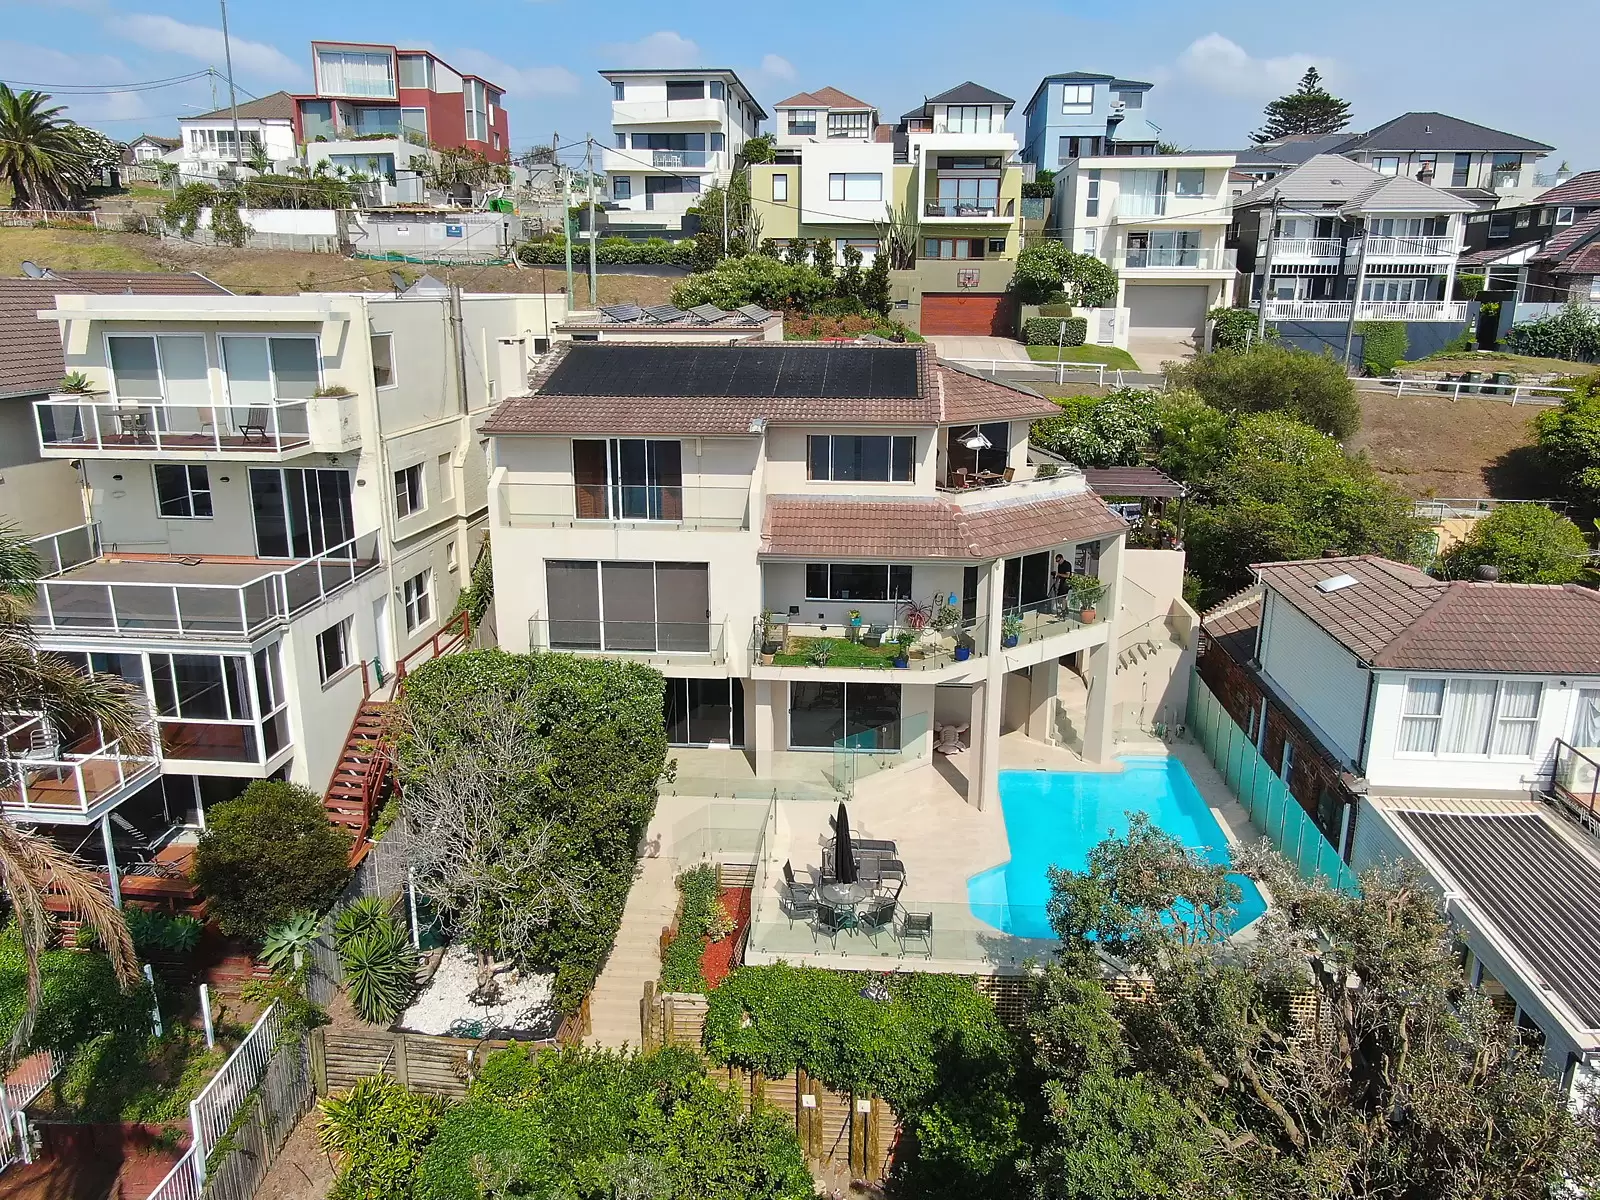 Photo #9: 5-7 Garnet Street, South Coogee - Sold by Sydney Sotheby's International Realty